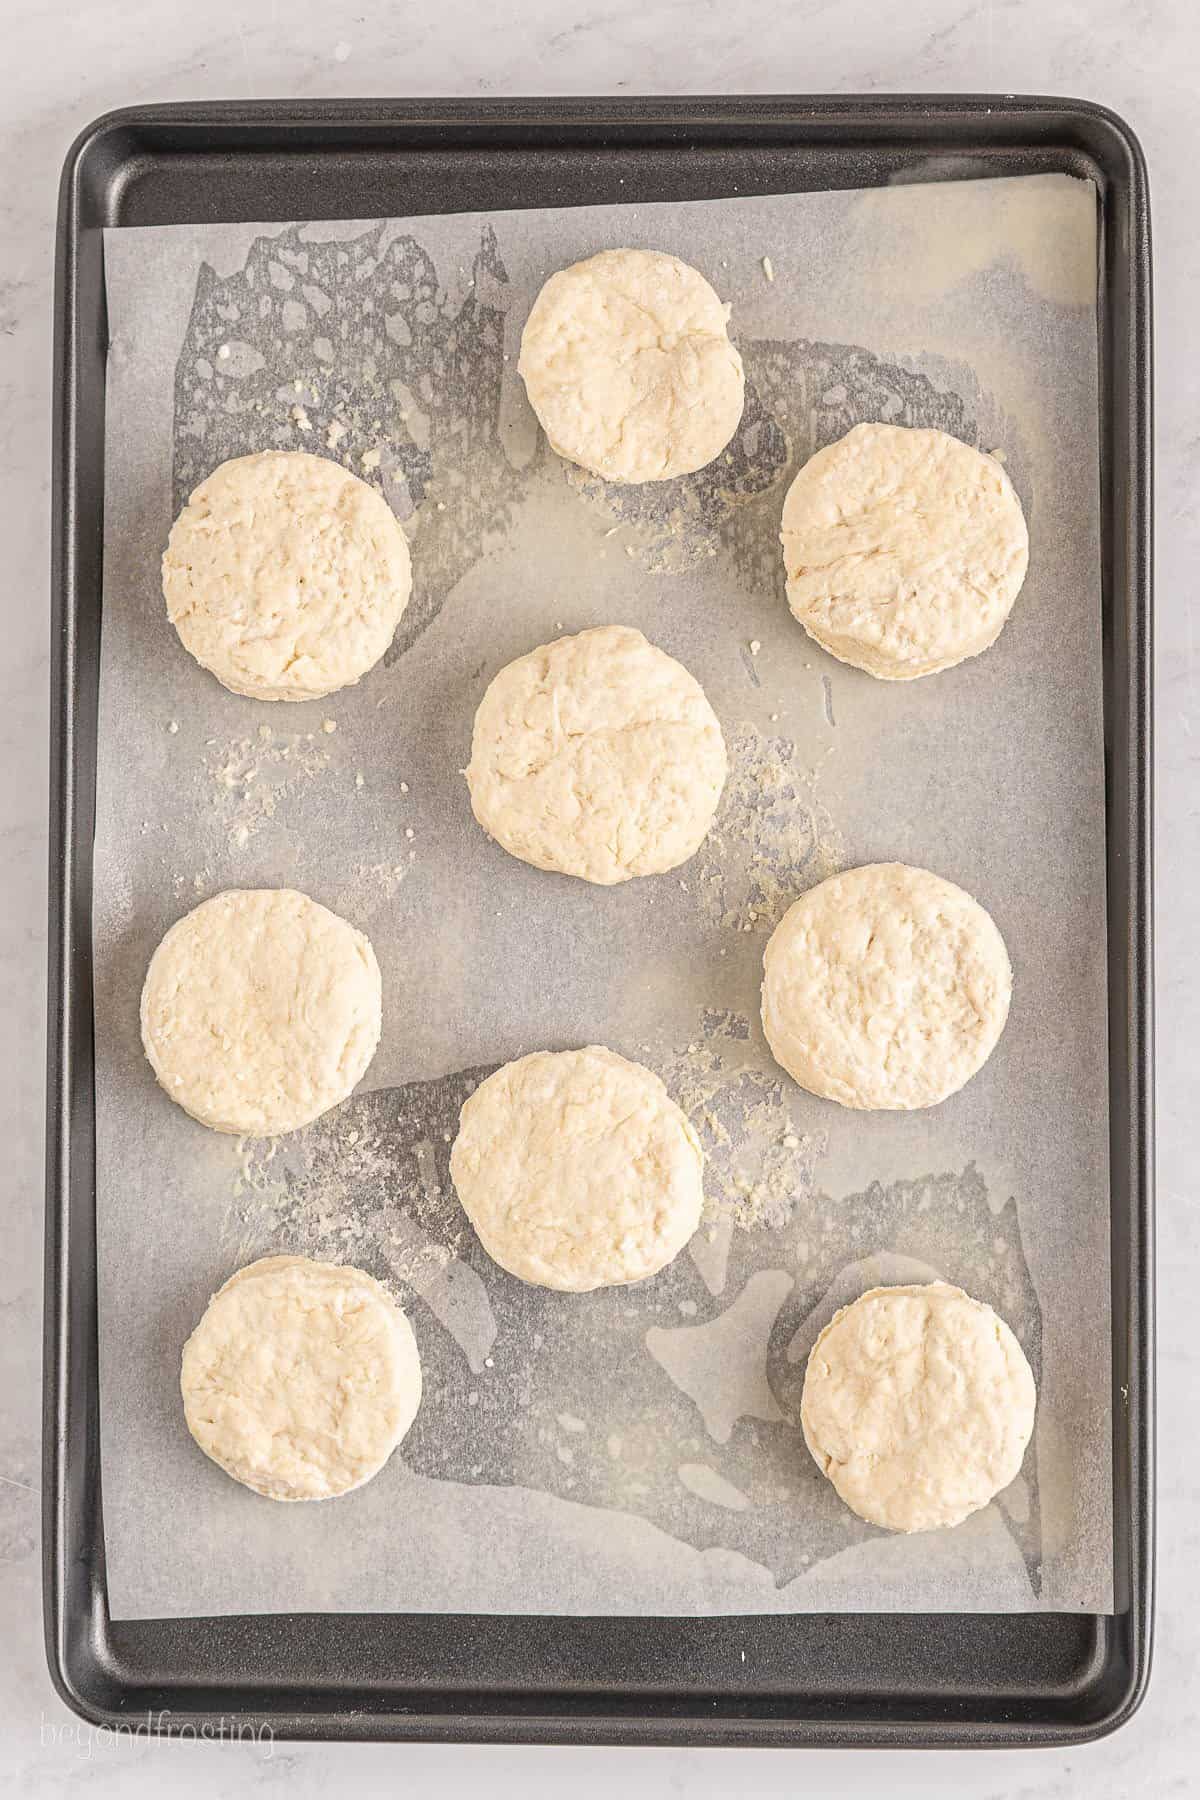 Overhead view of biscuits on a baking sheet